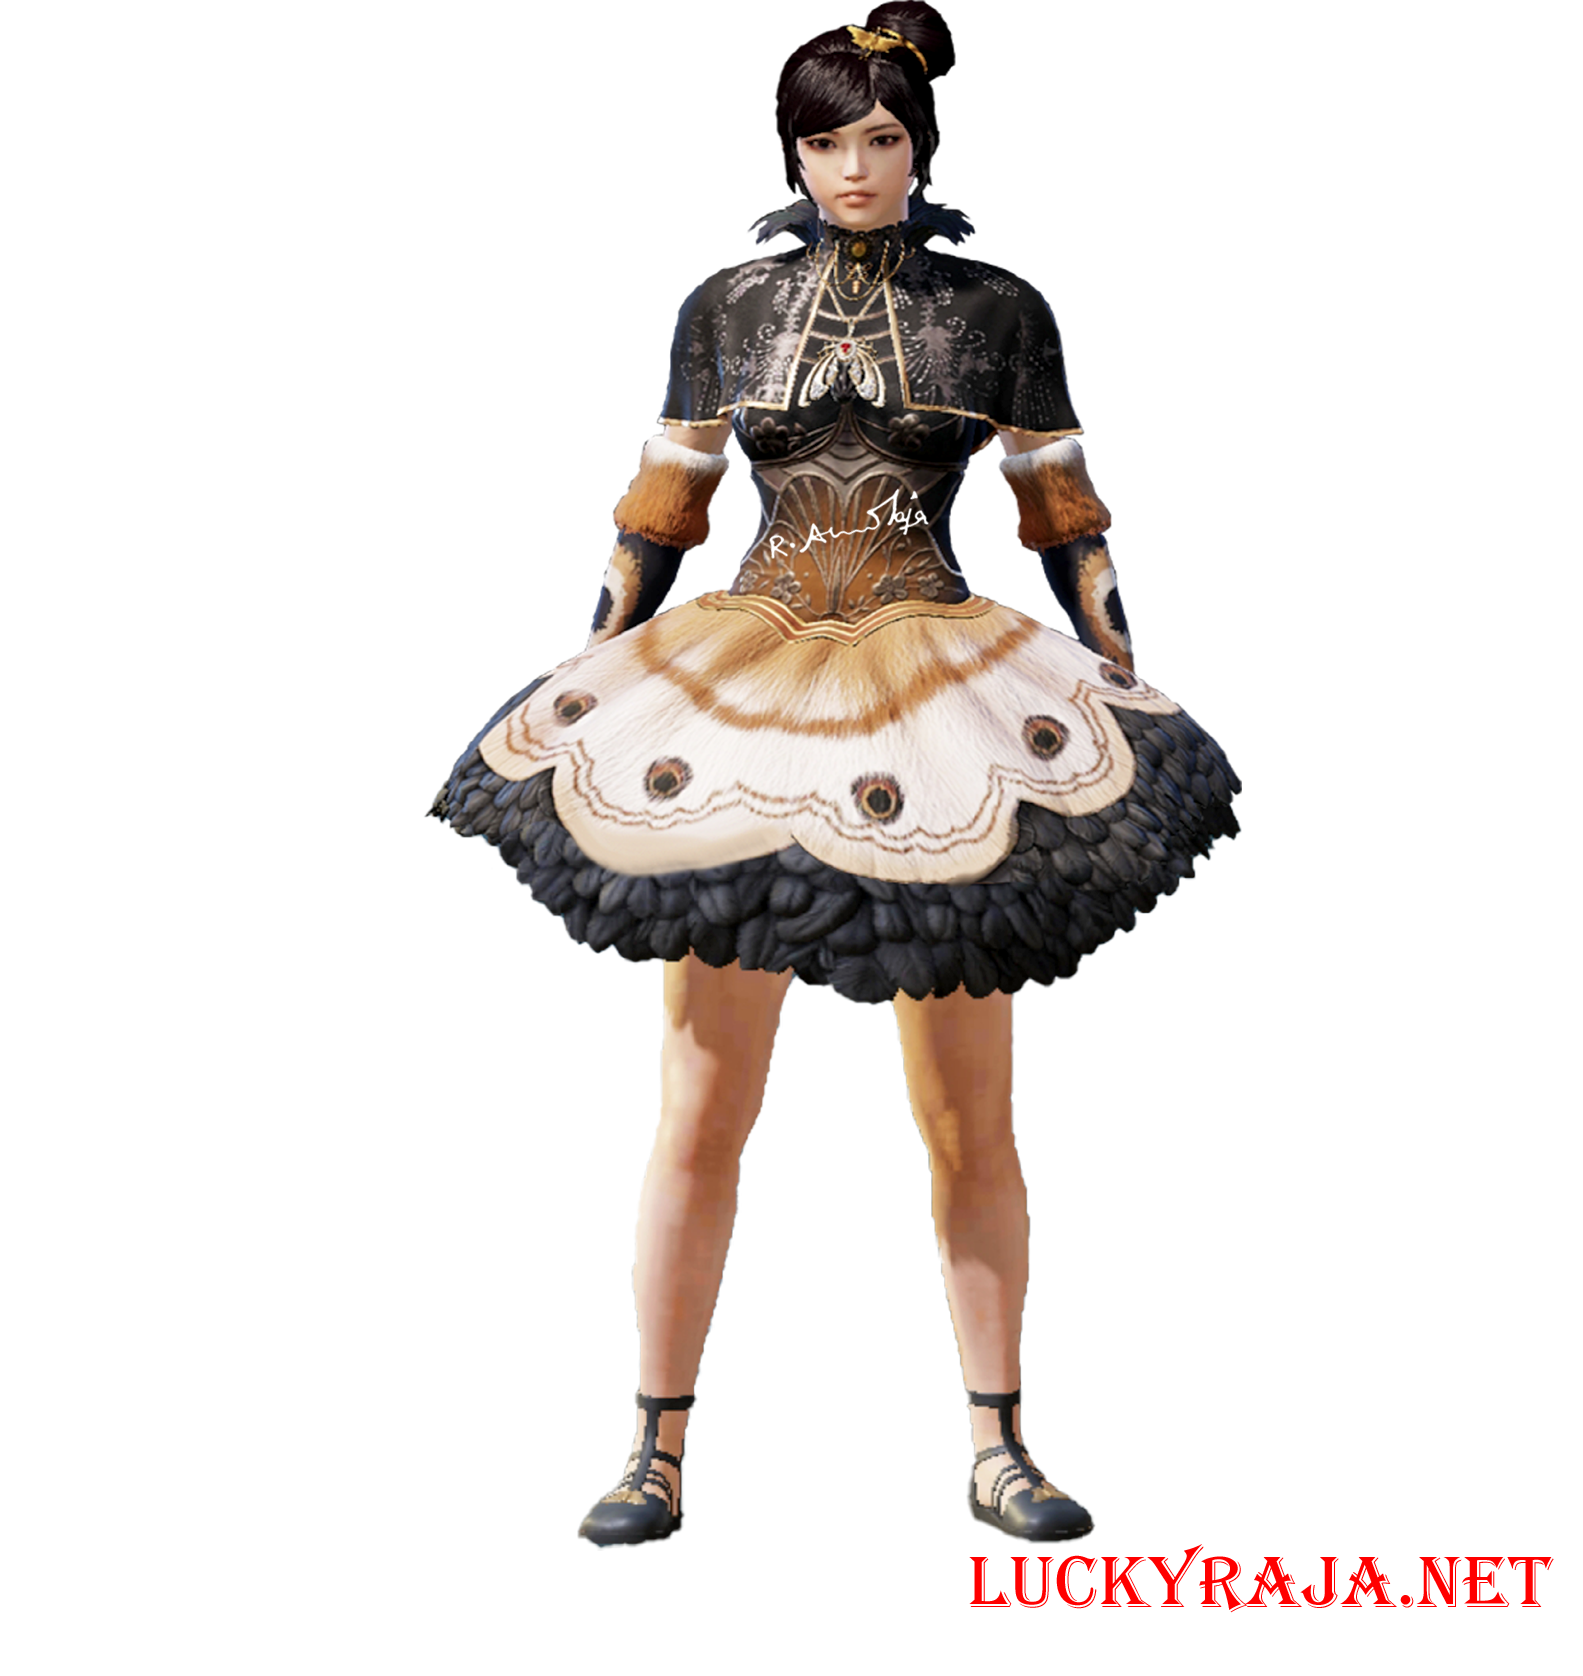 Eventide Butterfly,Eventide Butterfly set ,Eventide Butterfly images,c3s9 m18 RP 50 outfit pubg mobile,Eventide Butterfly outfit,pubg mobile outfits,animation,cartoon images